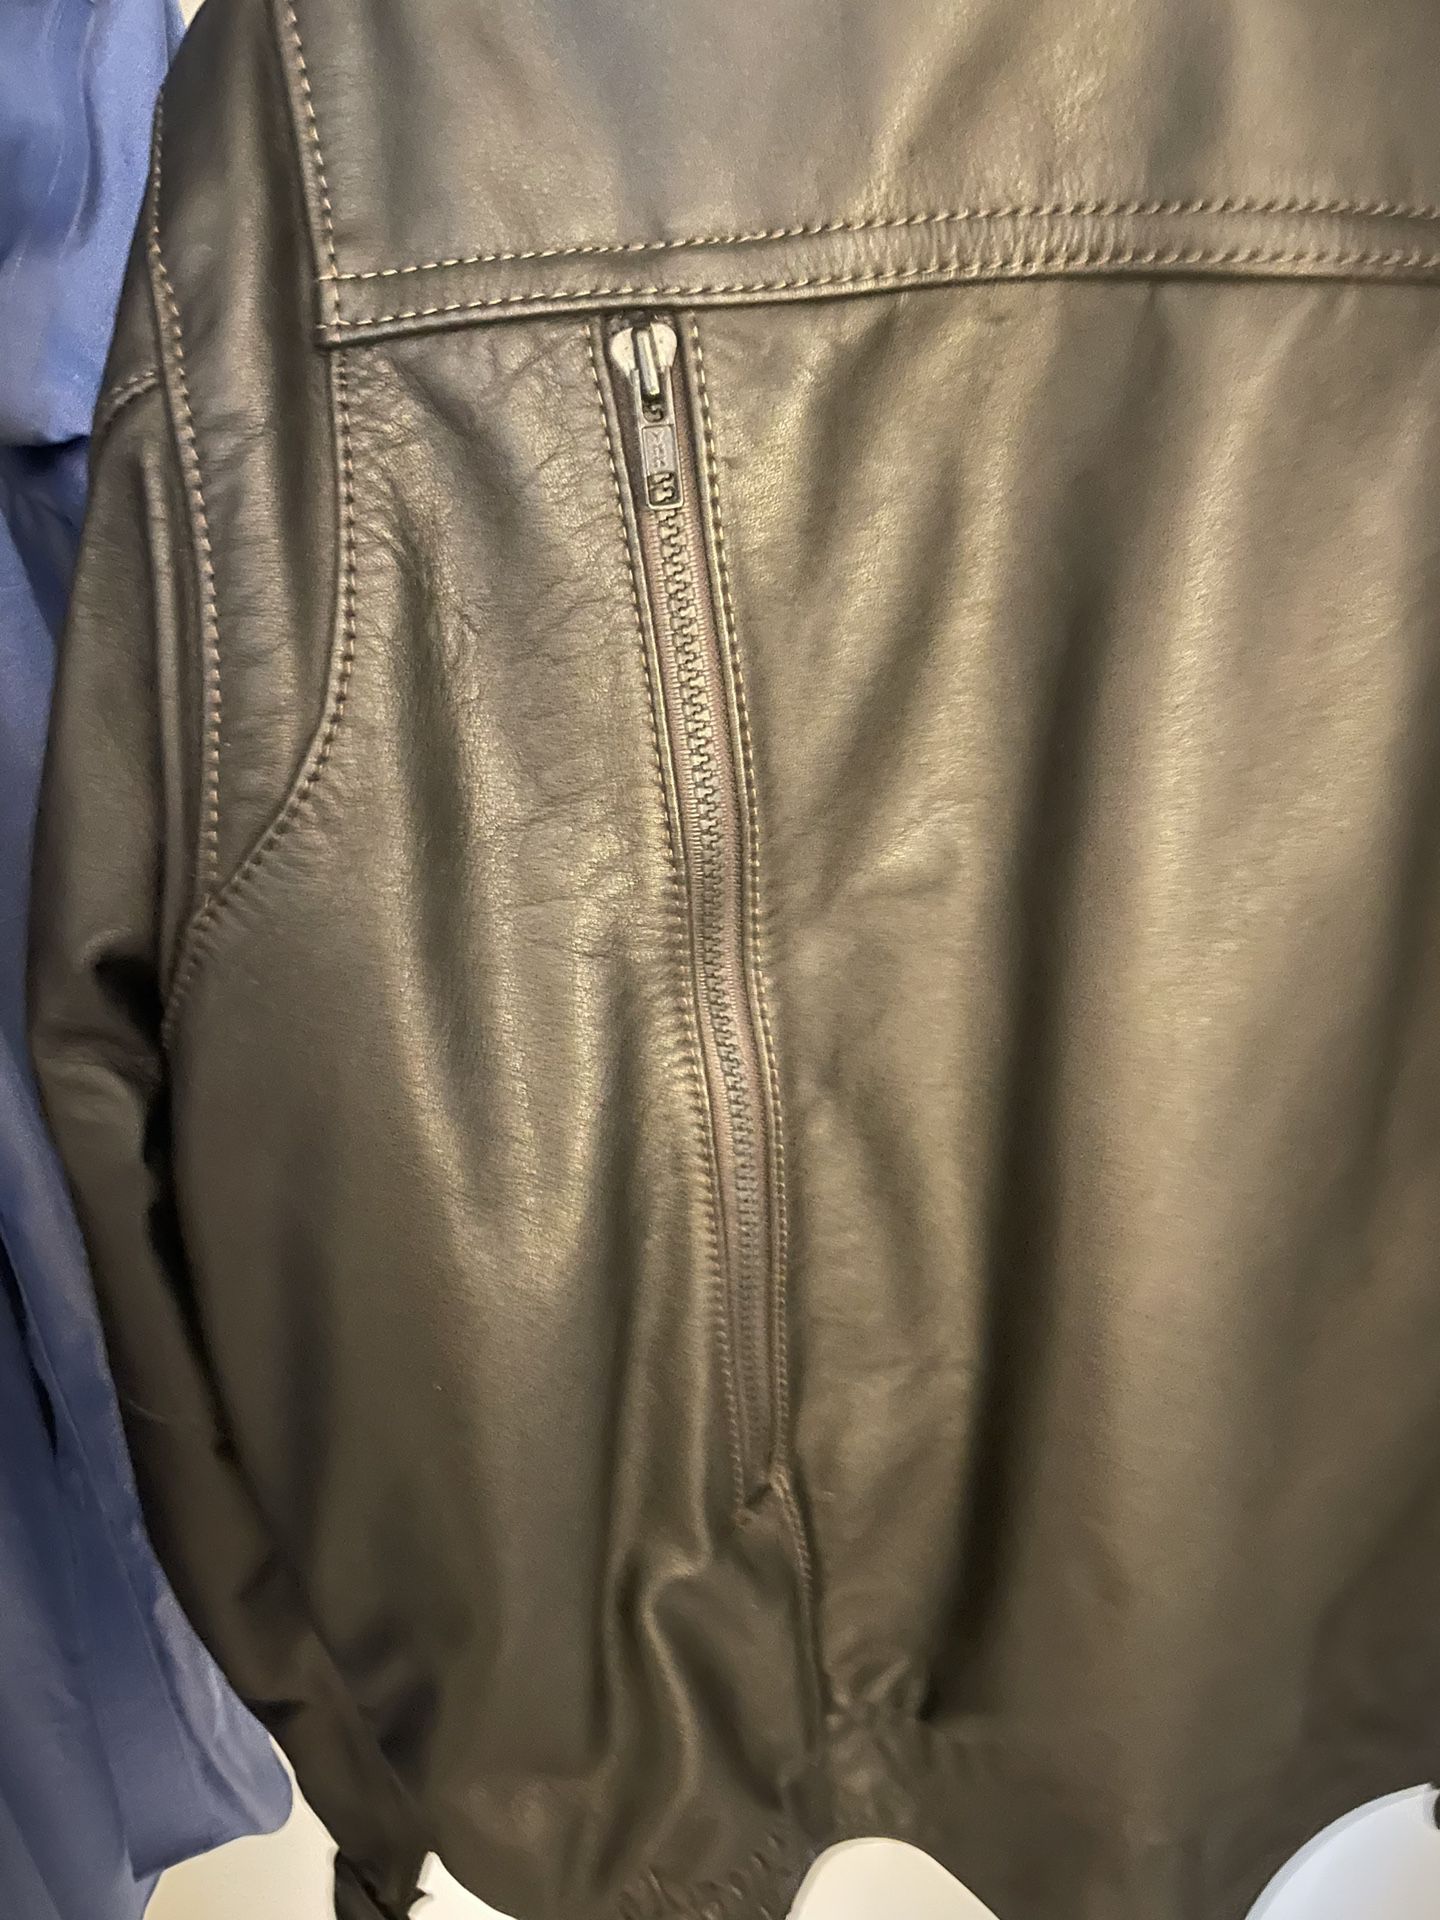 Leather Lined Motorcycle Men’s Large Jacket for Sale in Yardley, PA ...